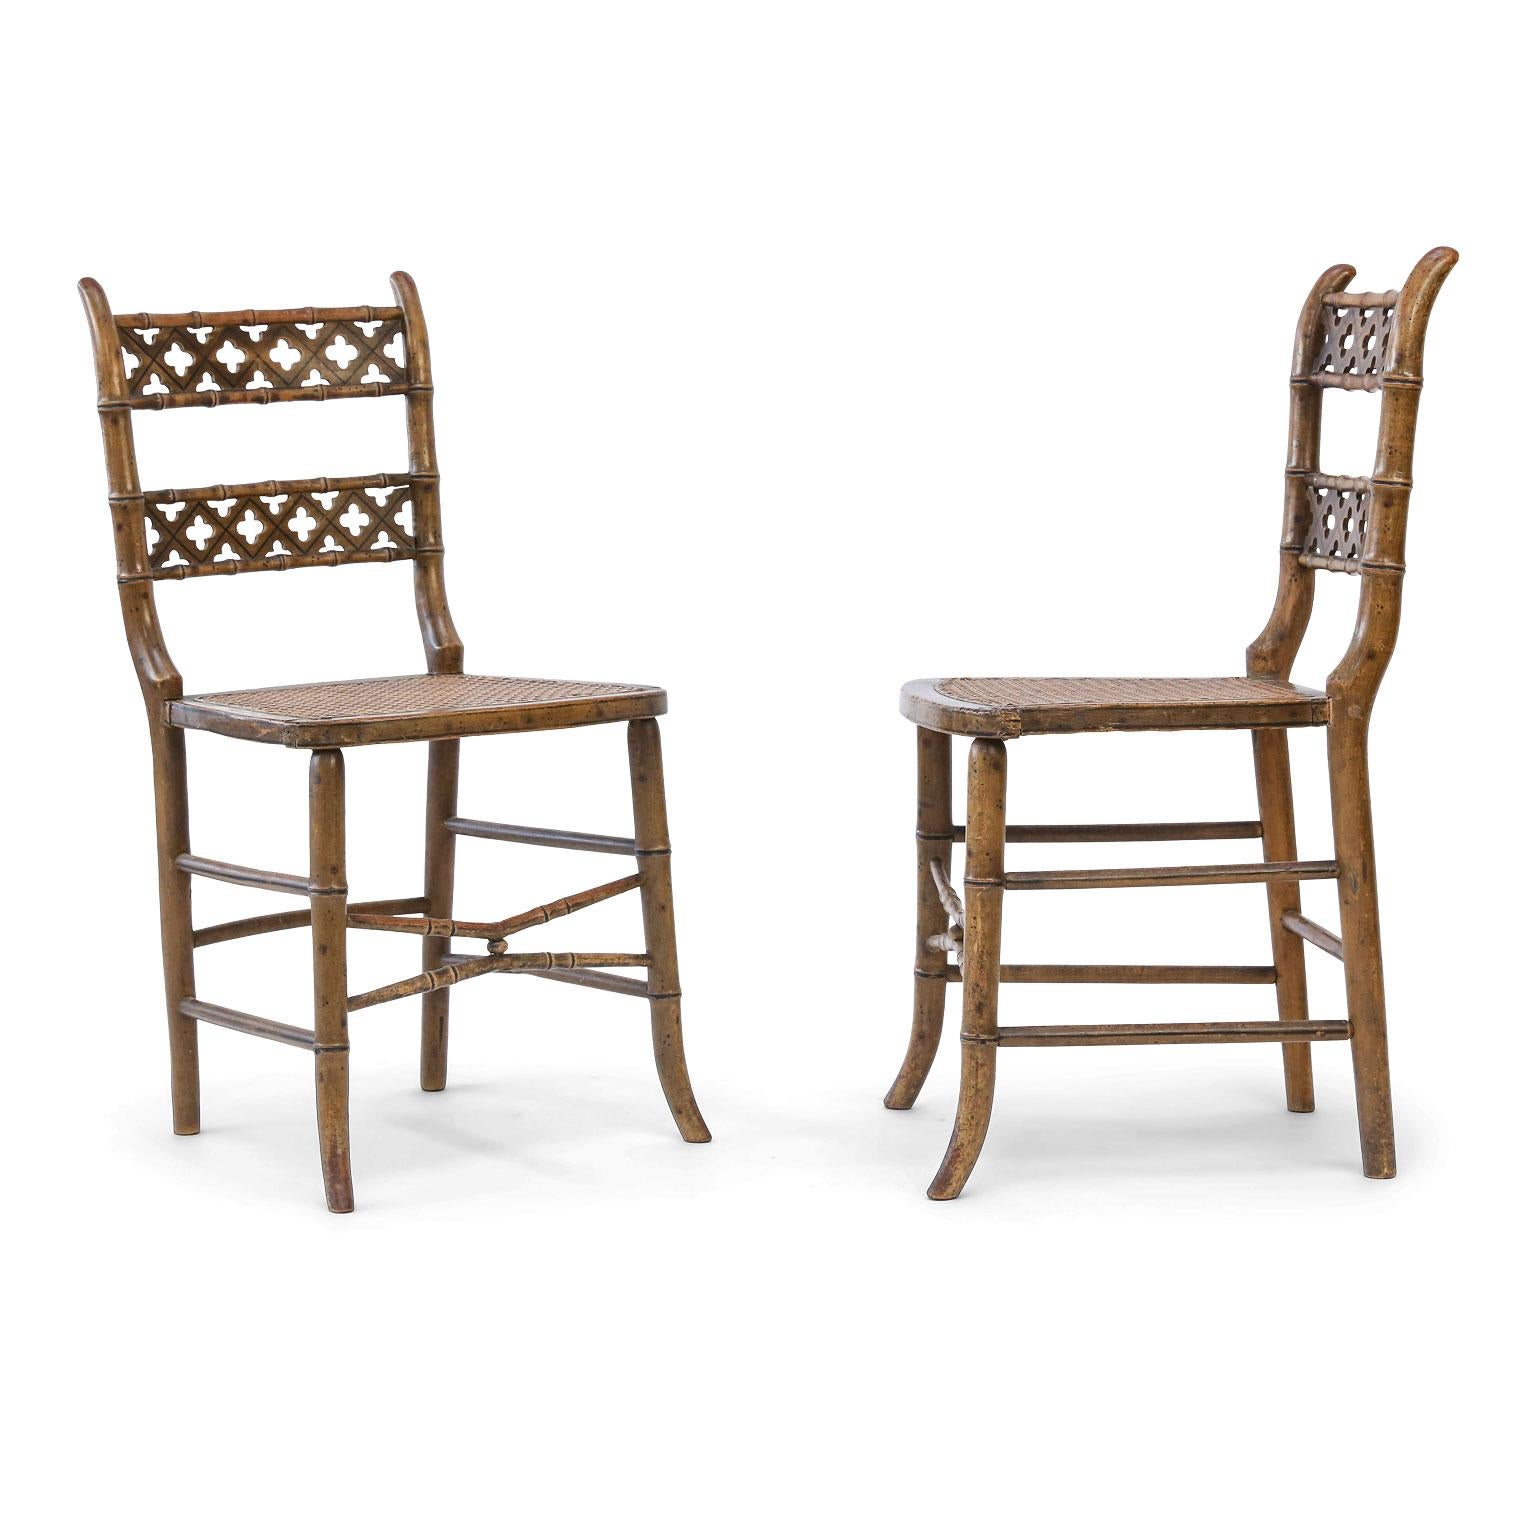 Pair of Regency Faux Bamboo Painted Chairs 2